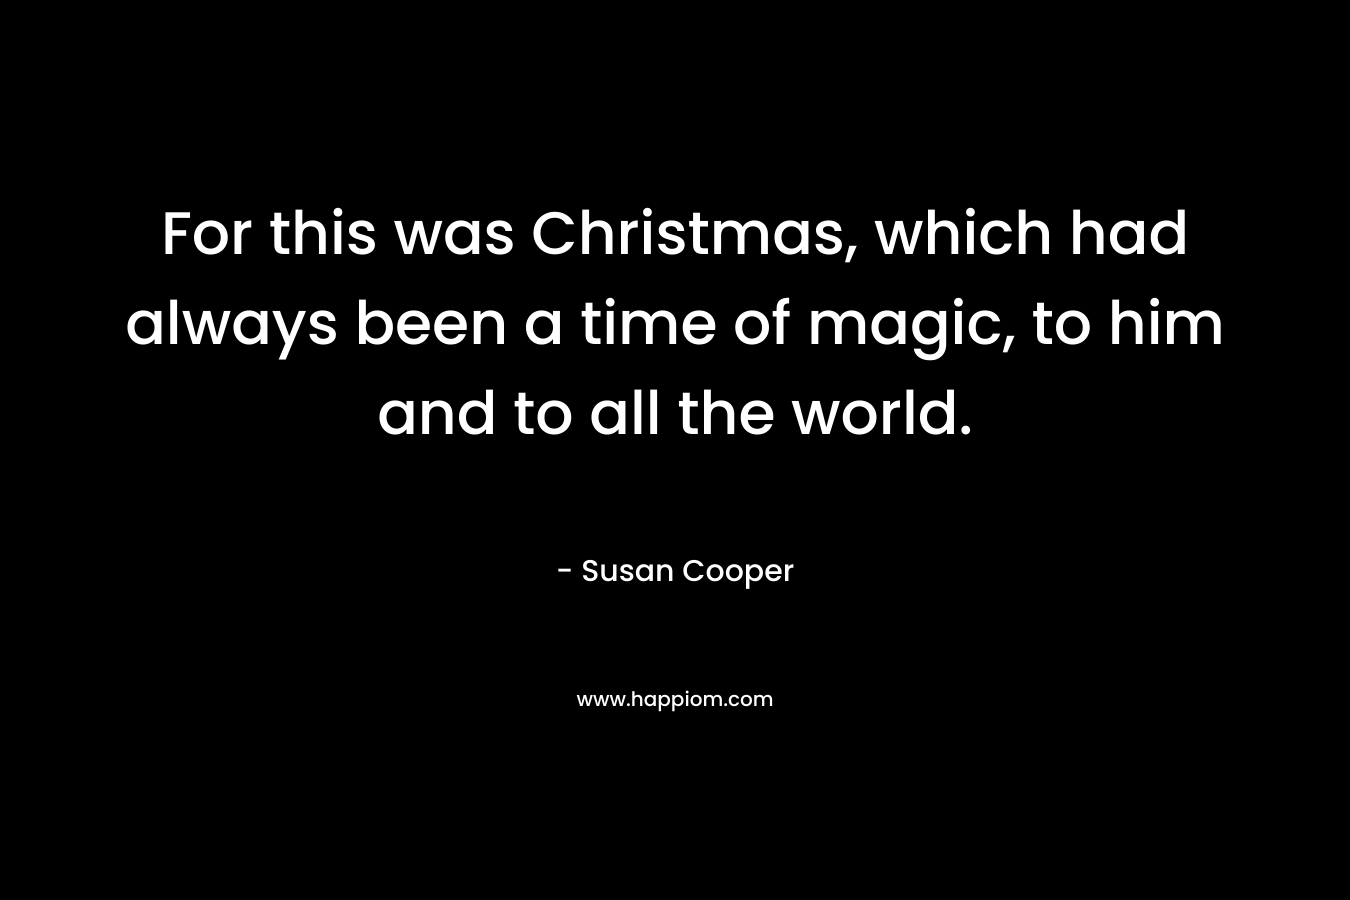 For this was Christmas, which had always been a time of magic, to him and to all the world. – Susan Cooper